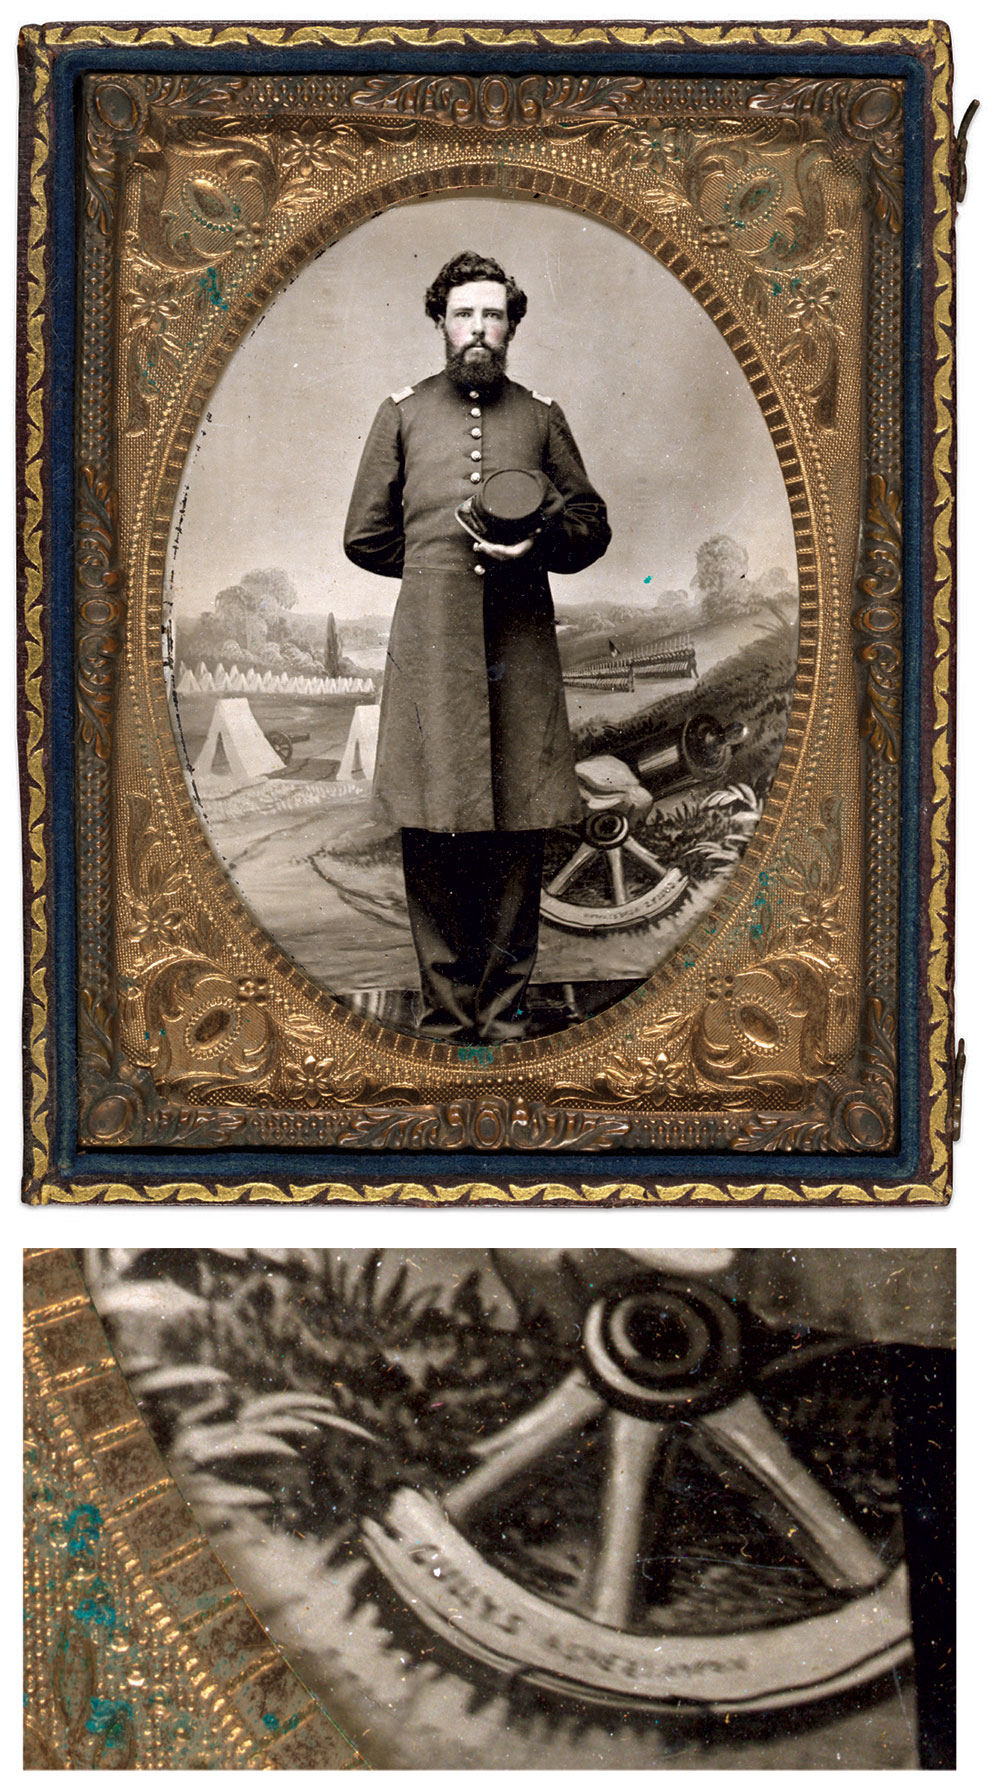 An unidentified Union officer posed in front of a distinctive backdrop featuring a fragment of a cannon wheel. A detail of the wheel, flipped here to compensate for the lateral reversal of the camera, shows the word “CULLYS” and another word that may possibly begin with “ASH.” Quarter-plate tintype by an unidentified photographer. The Liljenquist Family Collection at the Library of Congress.